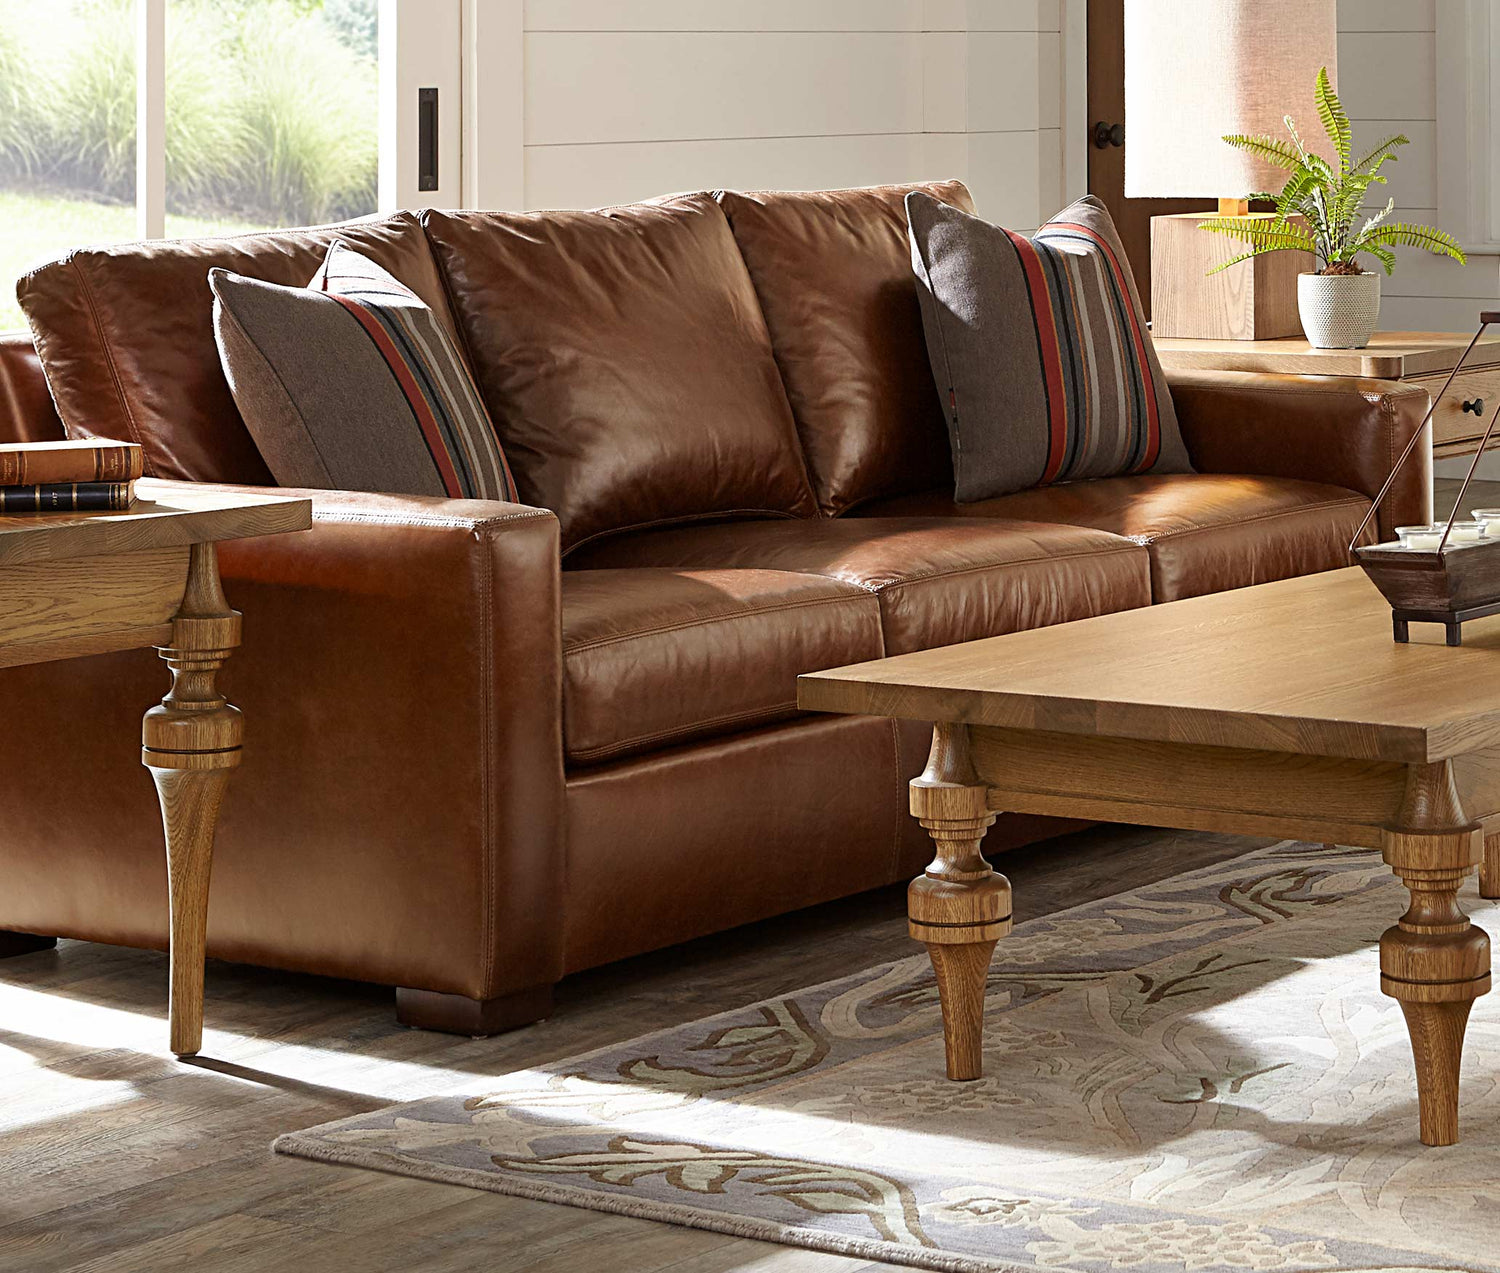 Lifestyle of a brown leather Memphis Sofa with two striped decorative pillows against both arms. There is a St. Lawrence Turned Cocktail Table in front of it, and a matching end table on either side